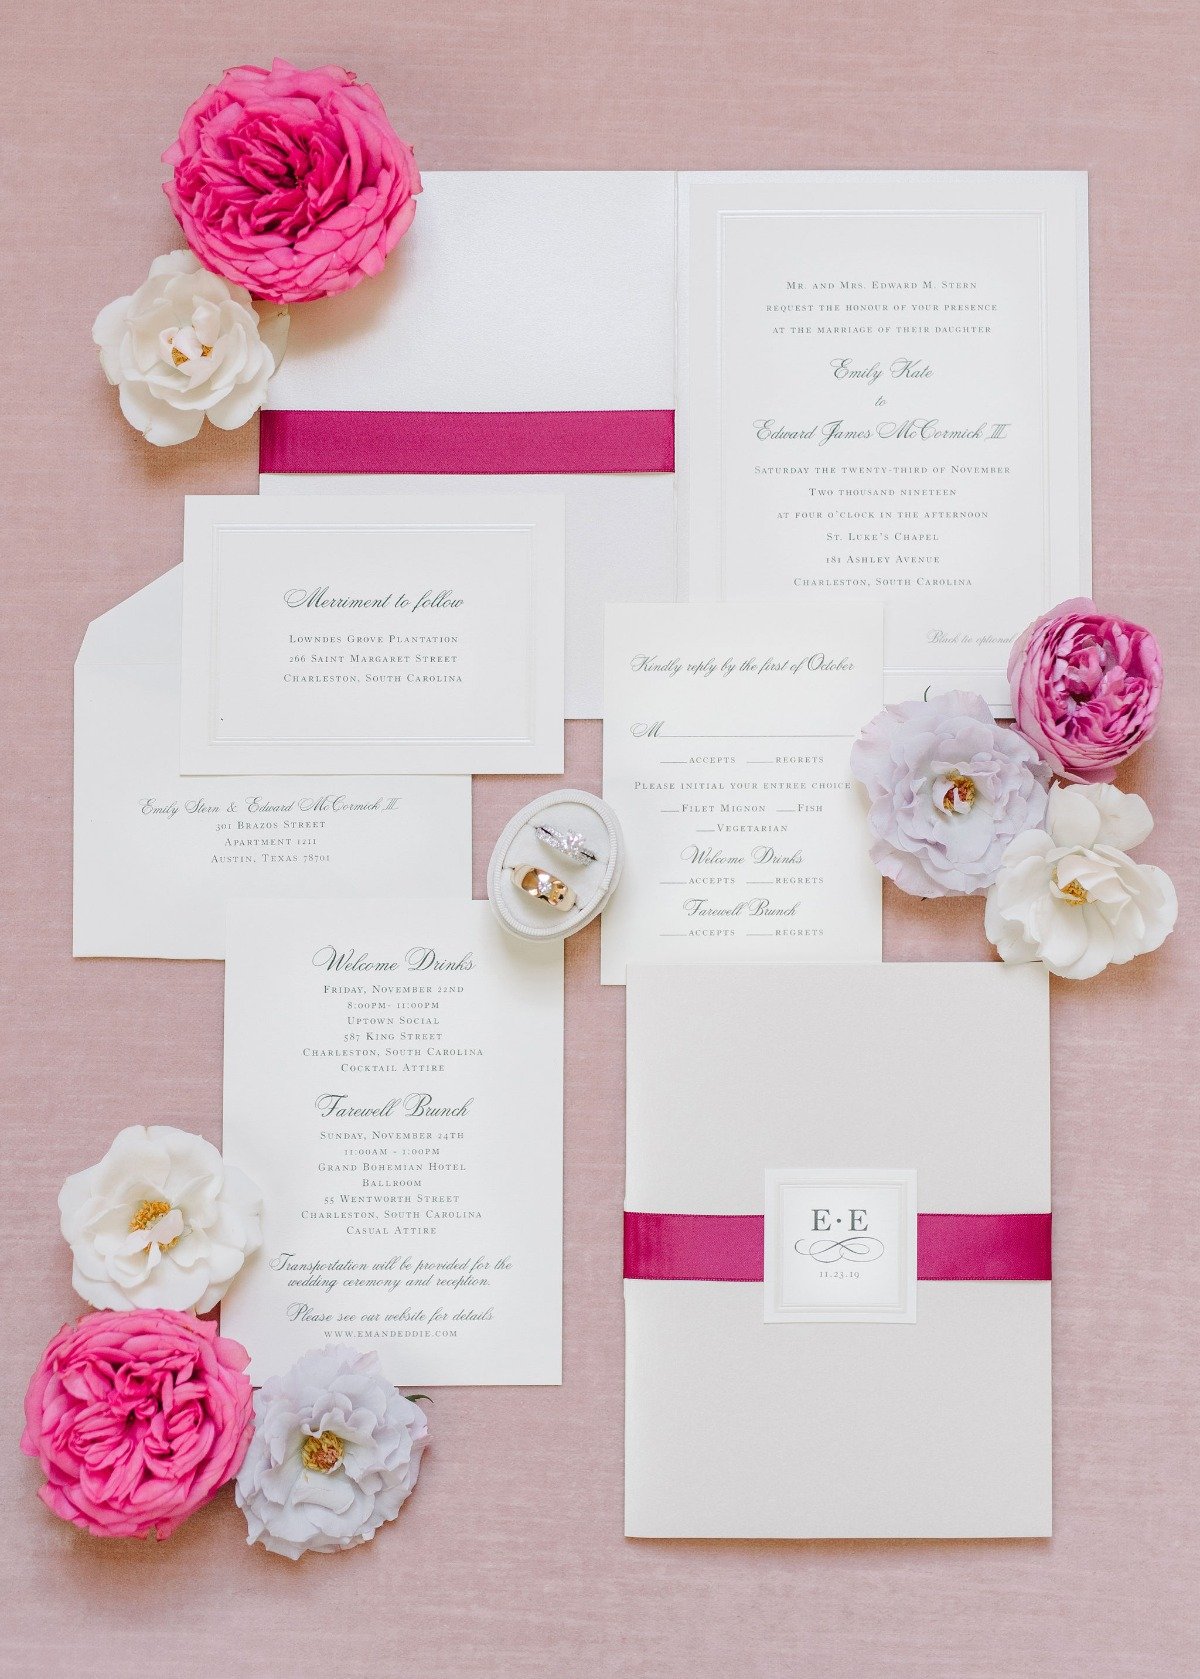 classic wedding invitations designed by J. Lily Design